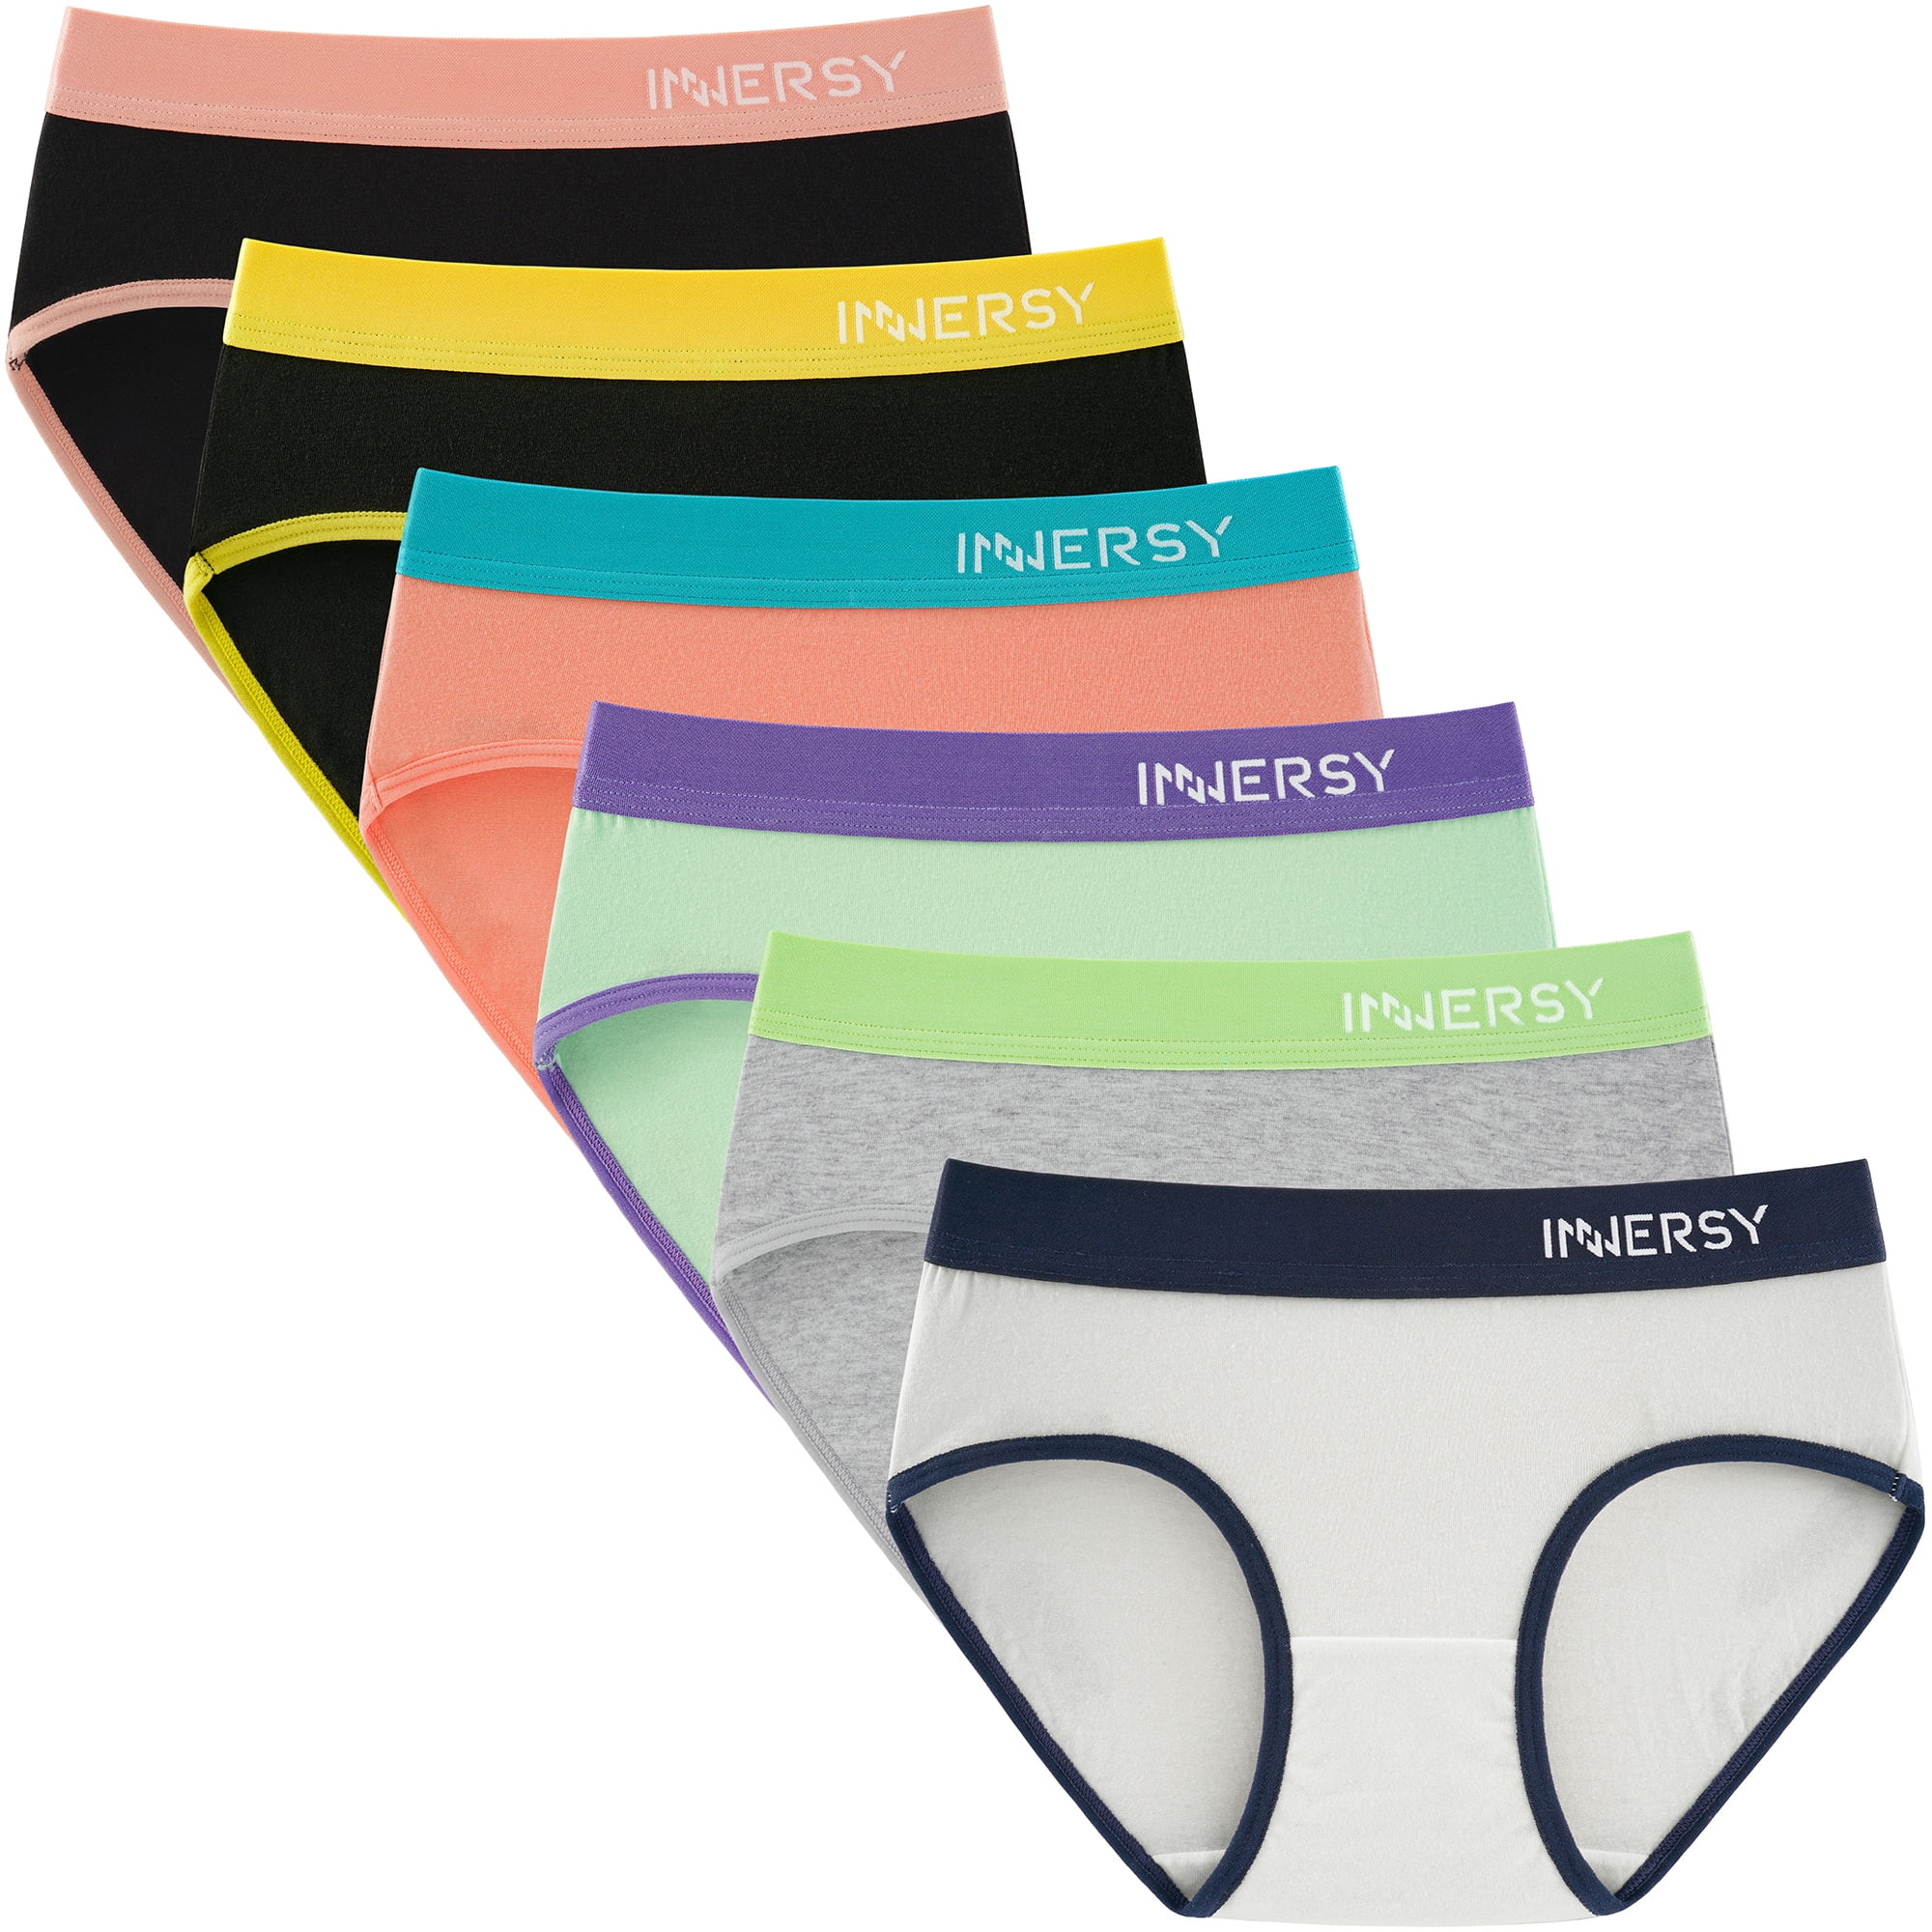 INNERSY Underwear for Girls Cotton Briefs Contrasting Color Teen Panties  Pack of 6 (S(8-10 yrs), Brights) 